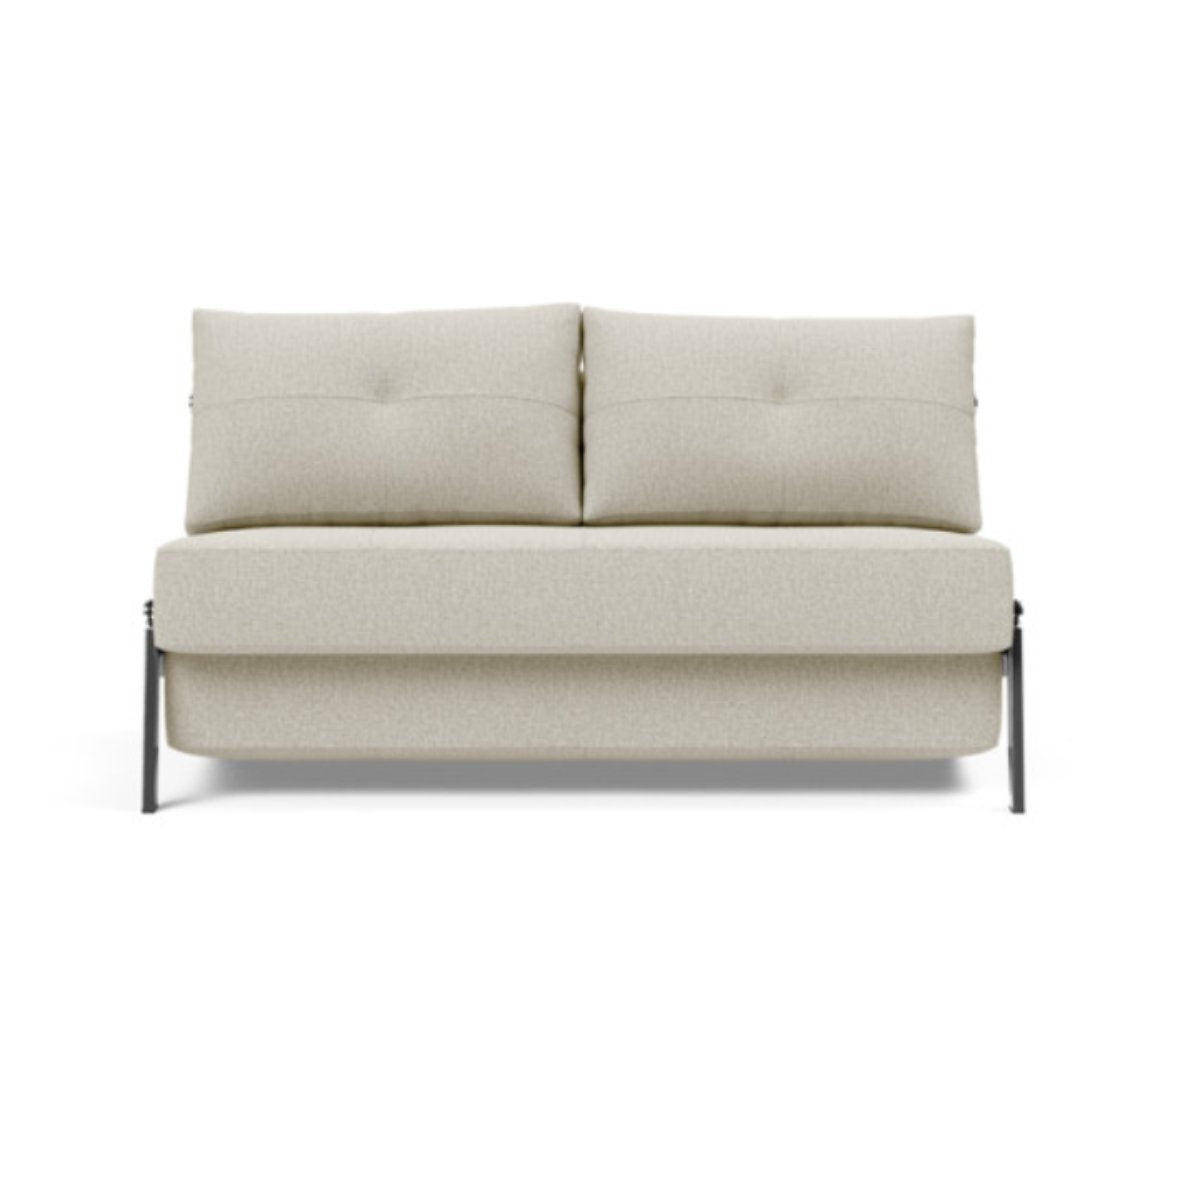 Load image into Gallery viewer, Cubed Full Size Sofa Bed With Chrome Legs 527 Mixed Dance NaturalSofa Beds INNOVATION  527 Mixed Dance Natural   Four Hands, Burke Decor, Mid Century Modern Furniture, Old Bones Furniture Company, Old Bones Co, Modern Mid Century, Designer Furniture, https://www.oldbonesco.com/
